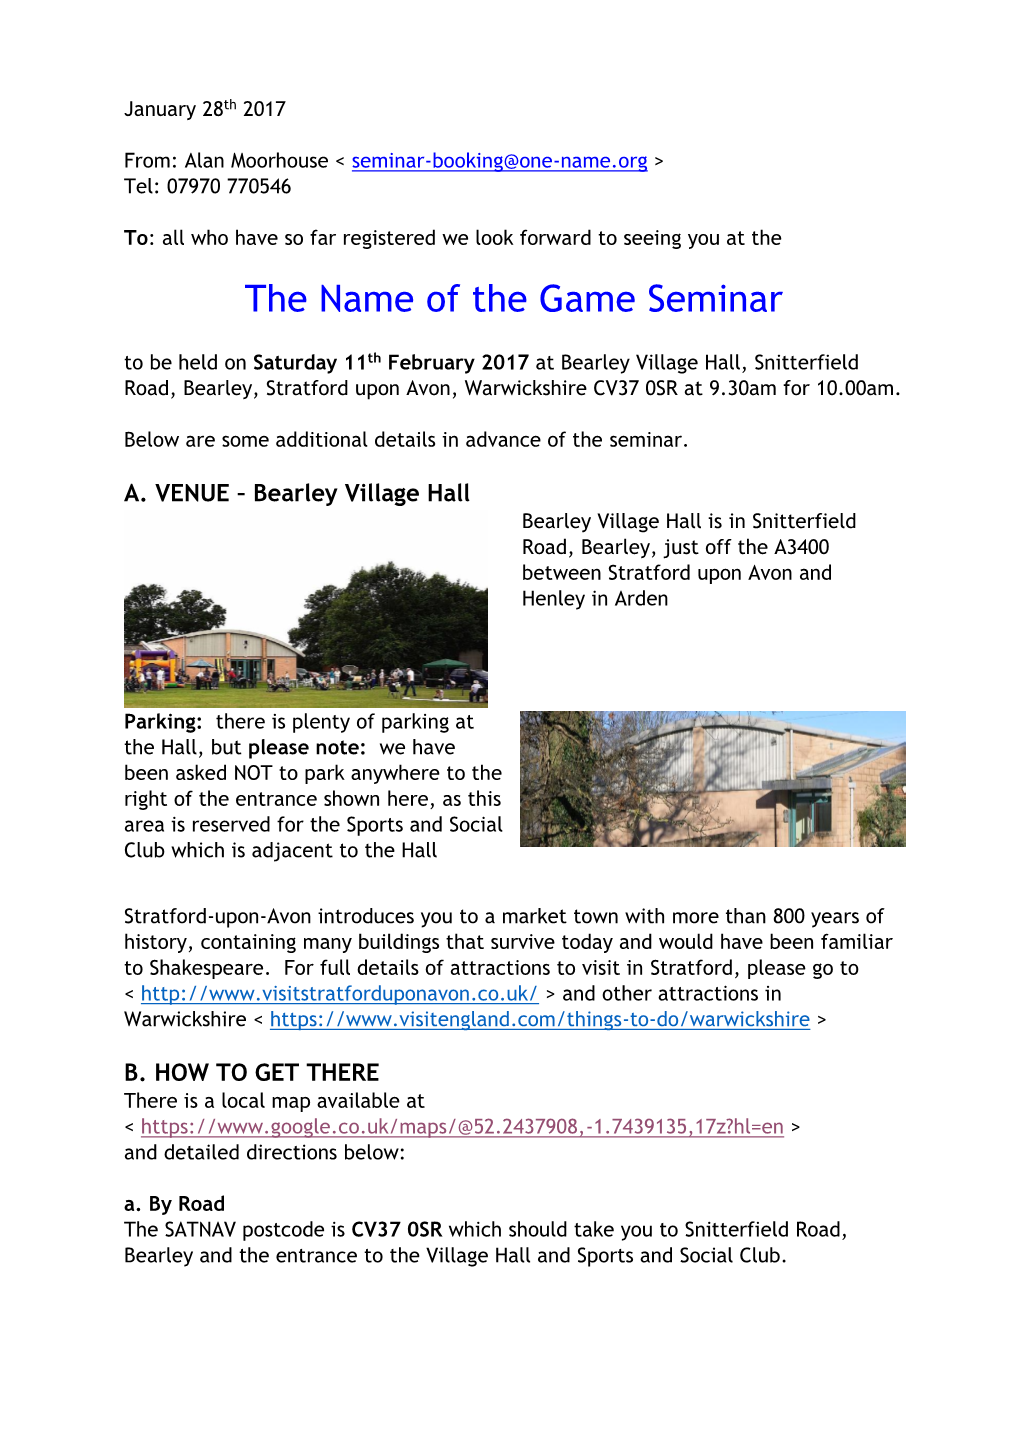 The Name of the Game Seminar